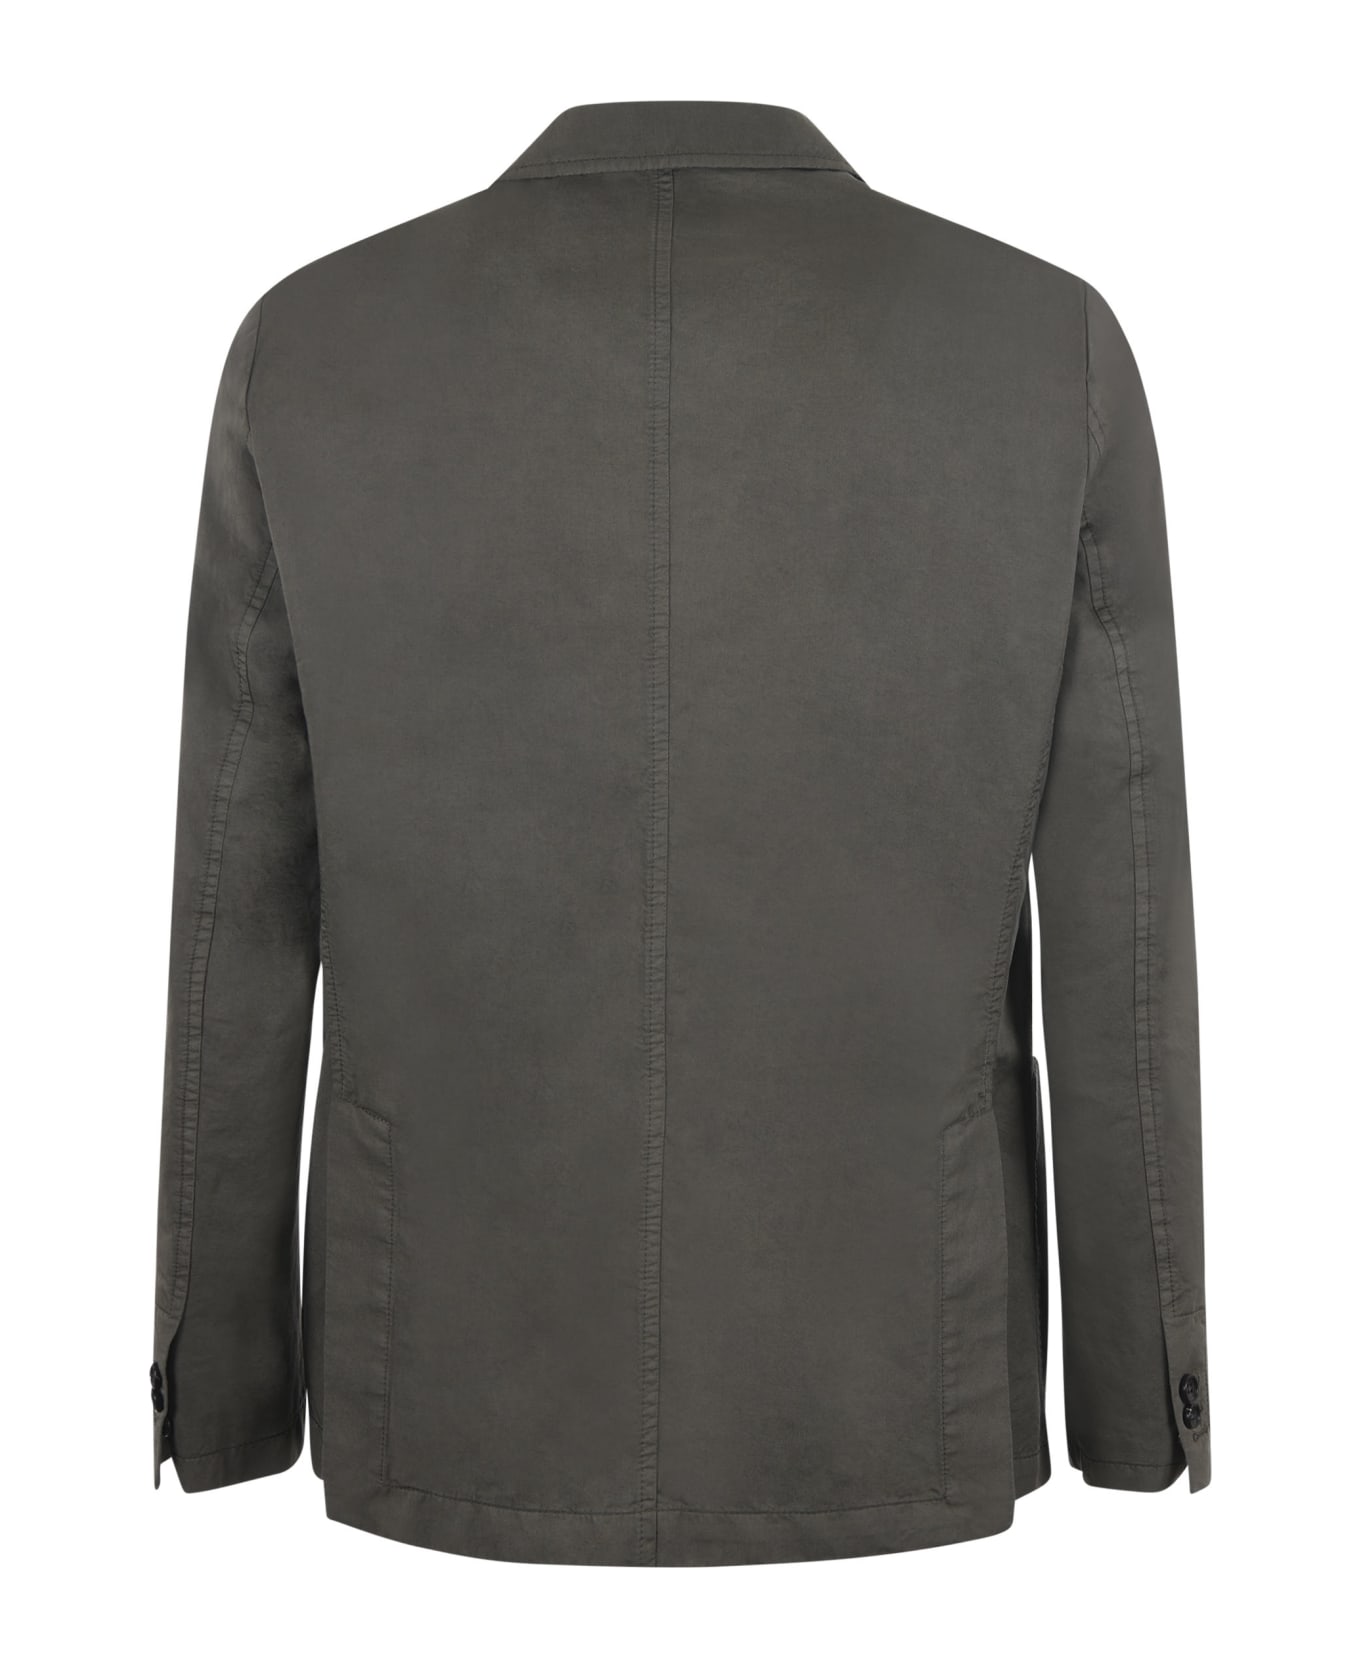 Paoloni Jacket In Cotton And Linen Blend - Verde militare